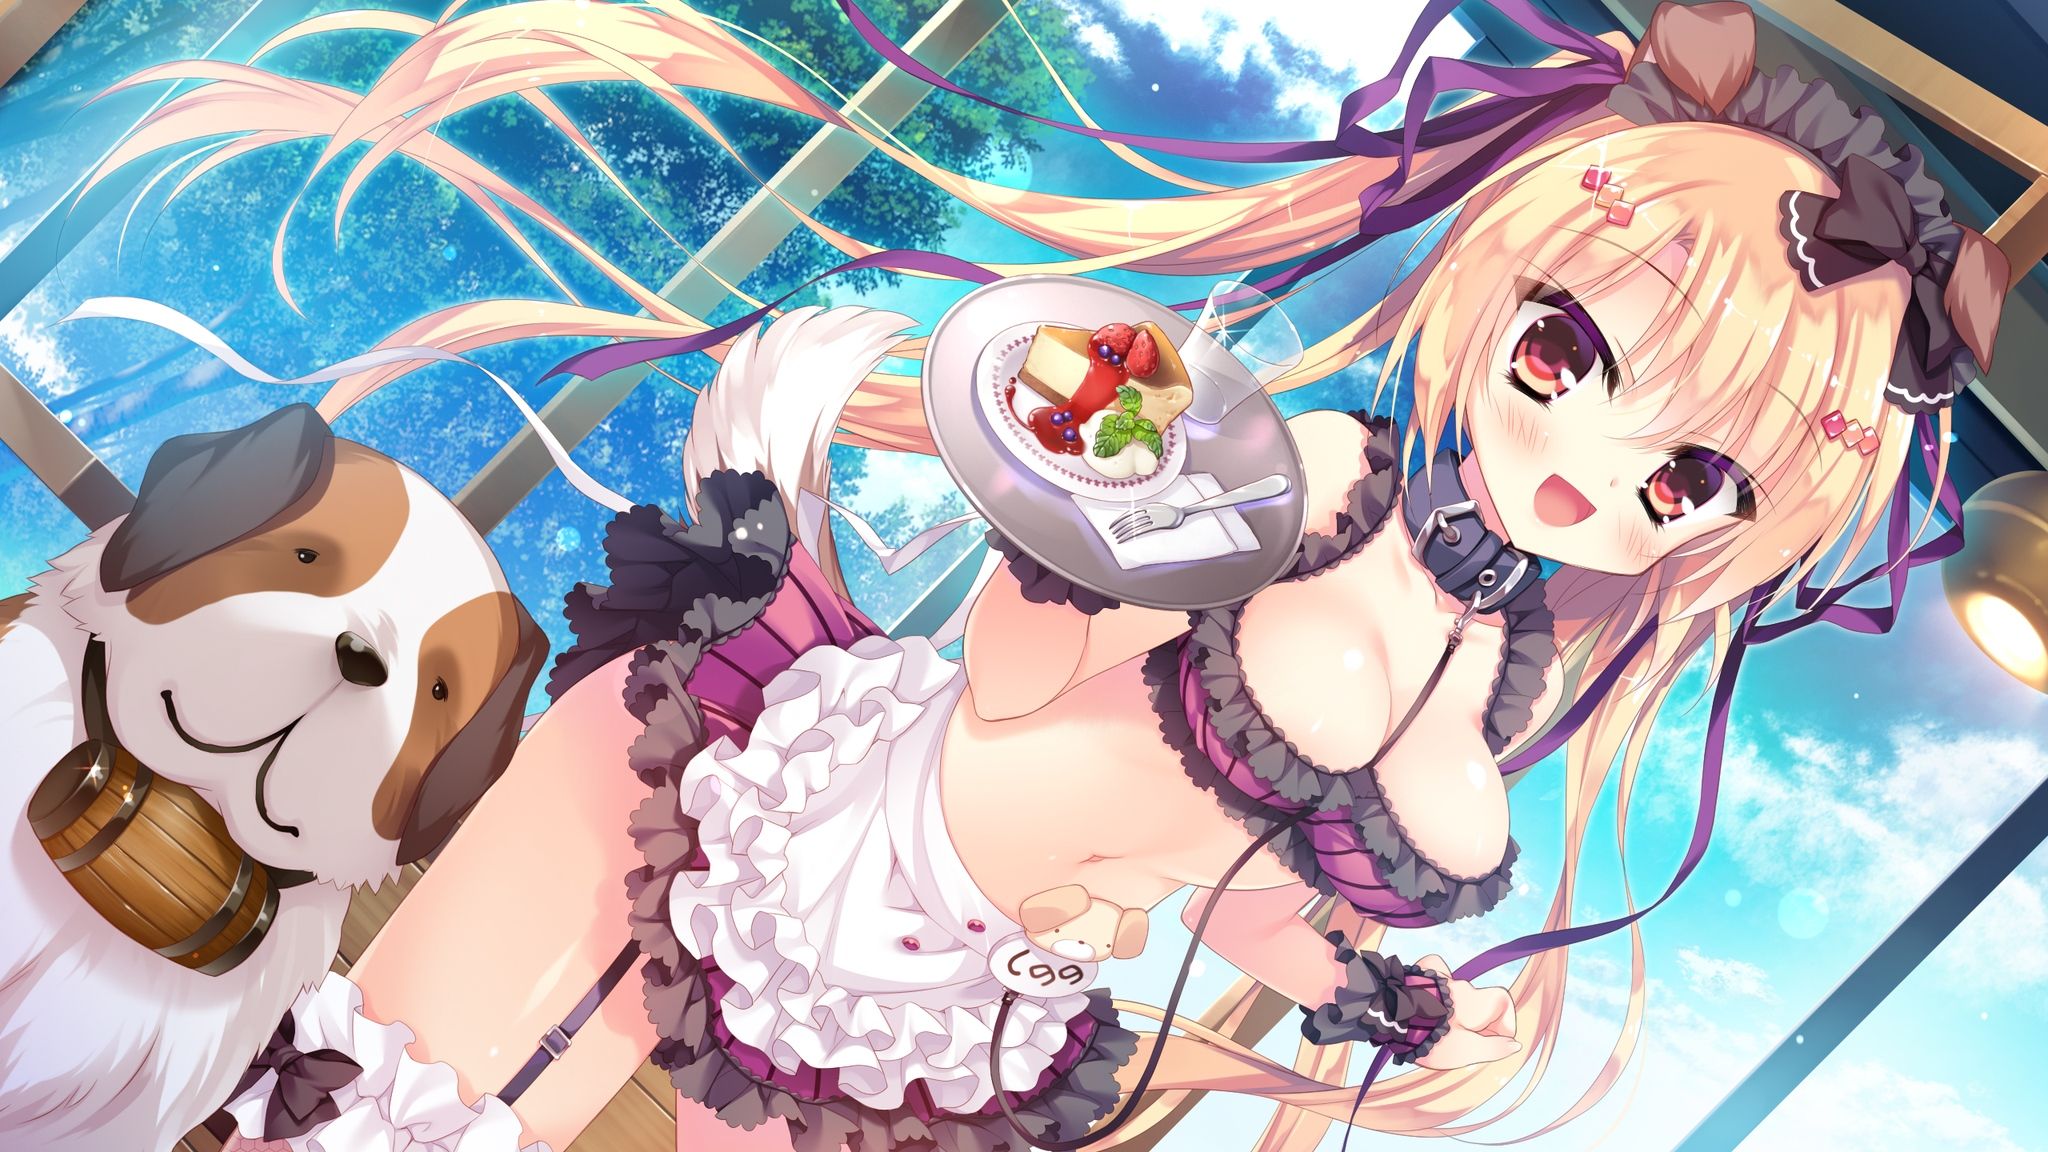 Dalmatians in Nya I'm ☆ served ALA mode! [PC18 forbidden eroge HCG] erotic wallpapers and pictures part 2 3